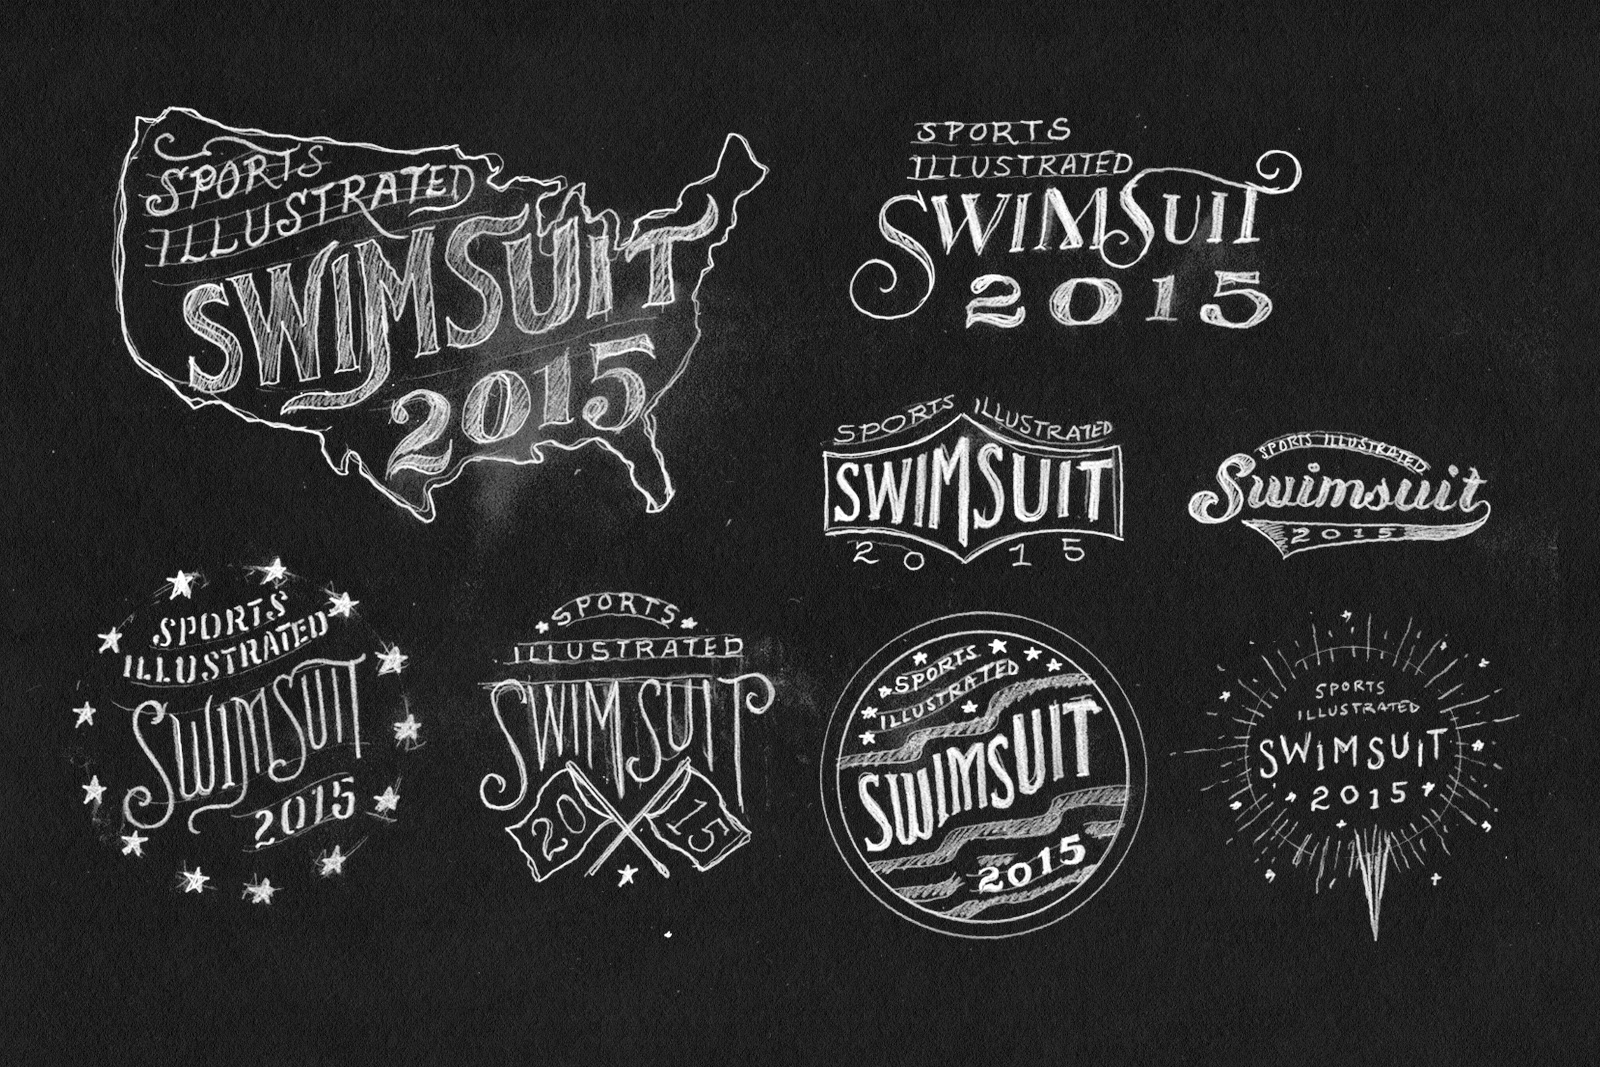 sports illustrated 2015 swimsuit edition logos by jon contino